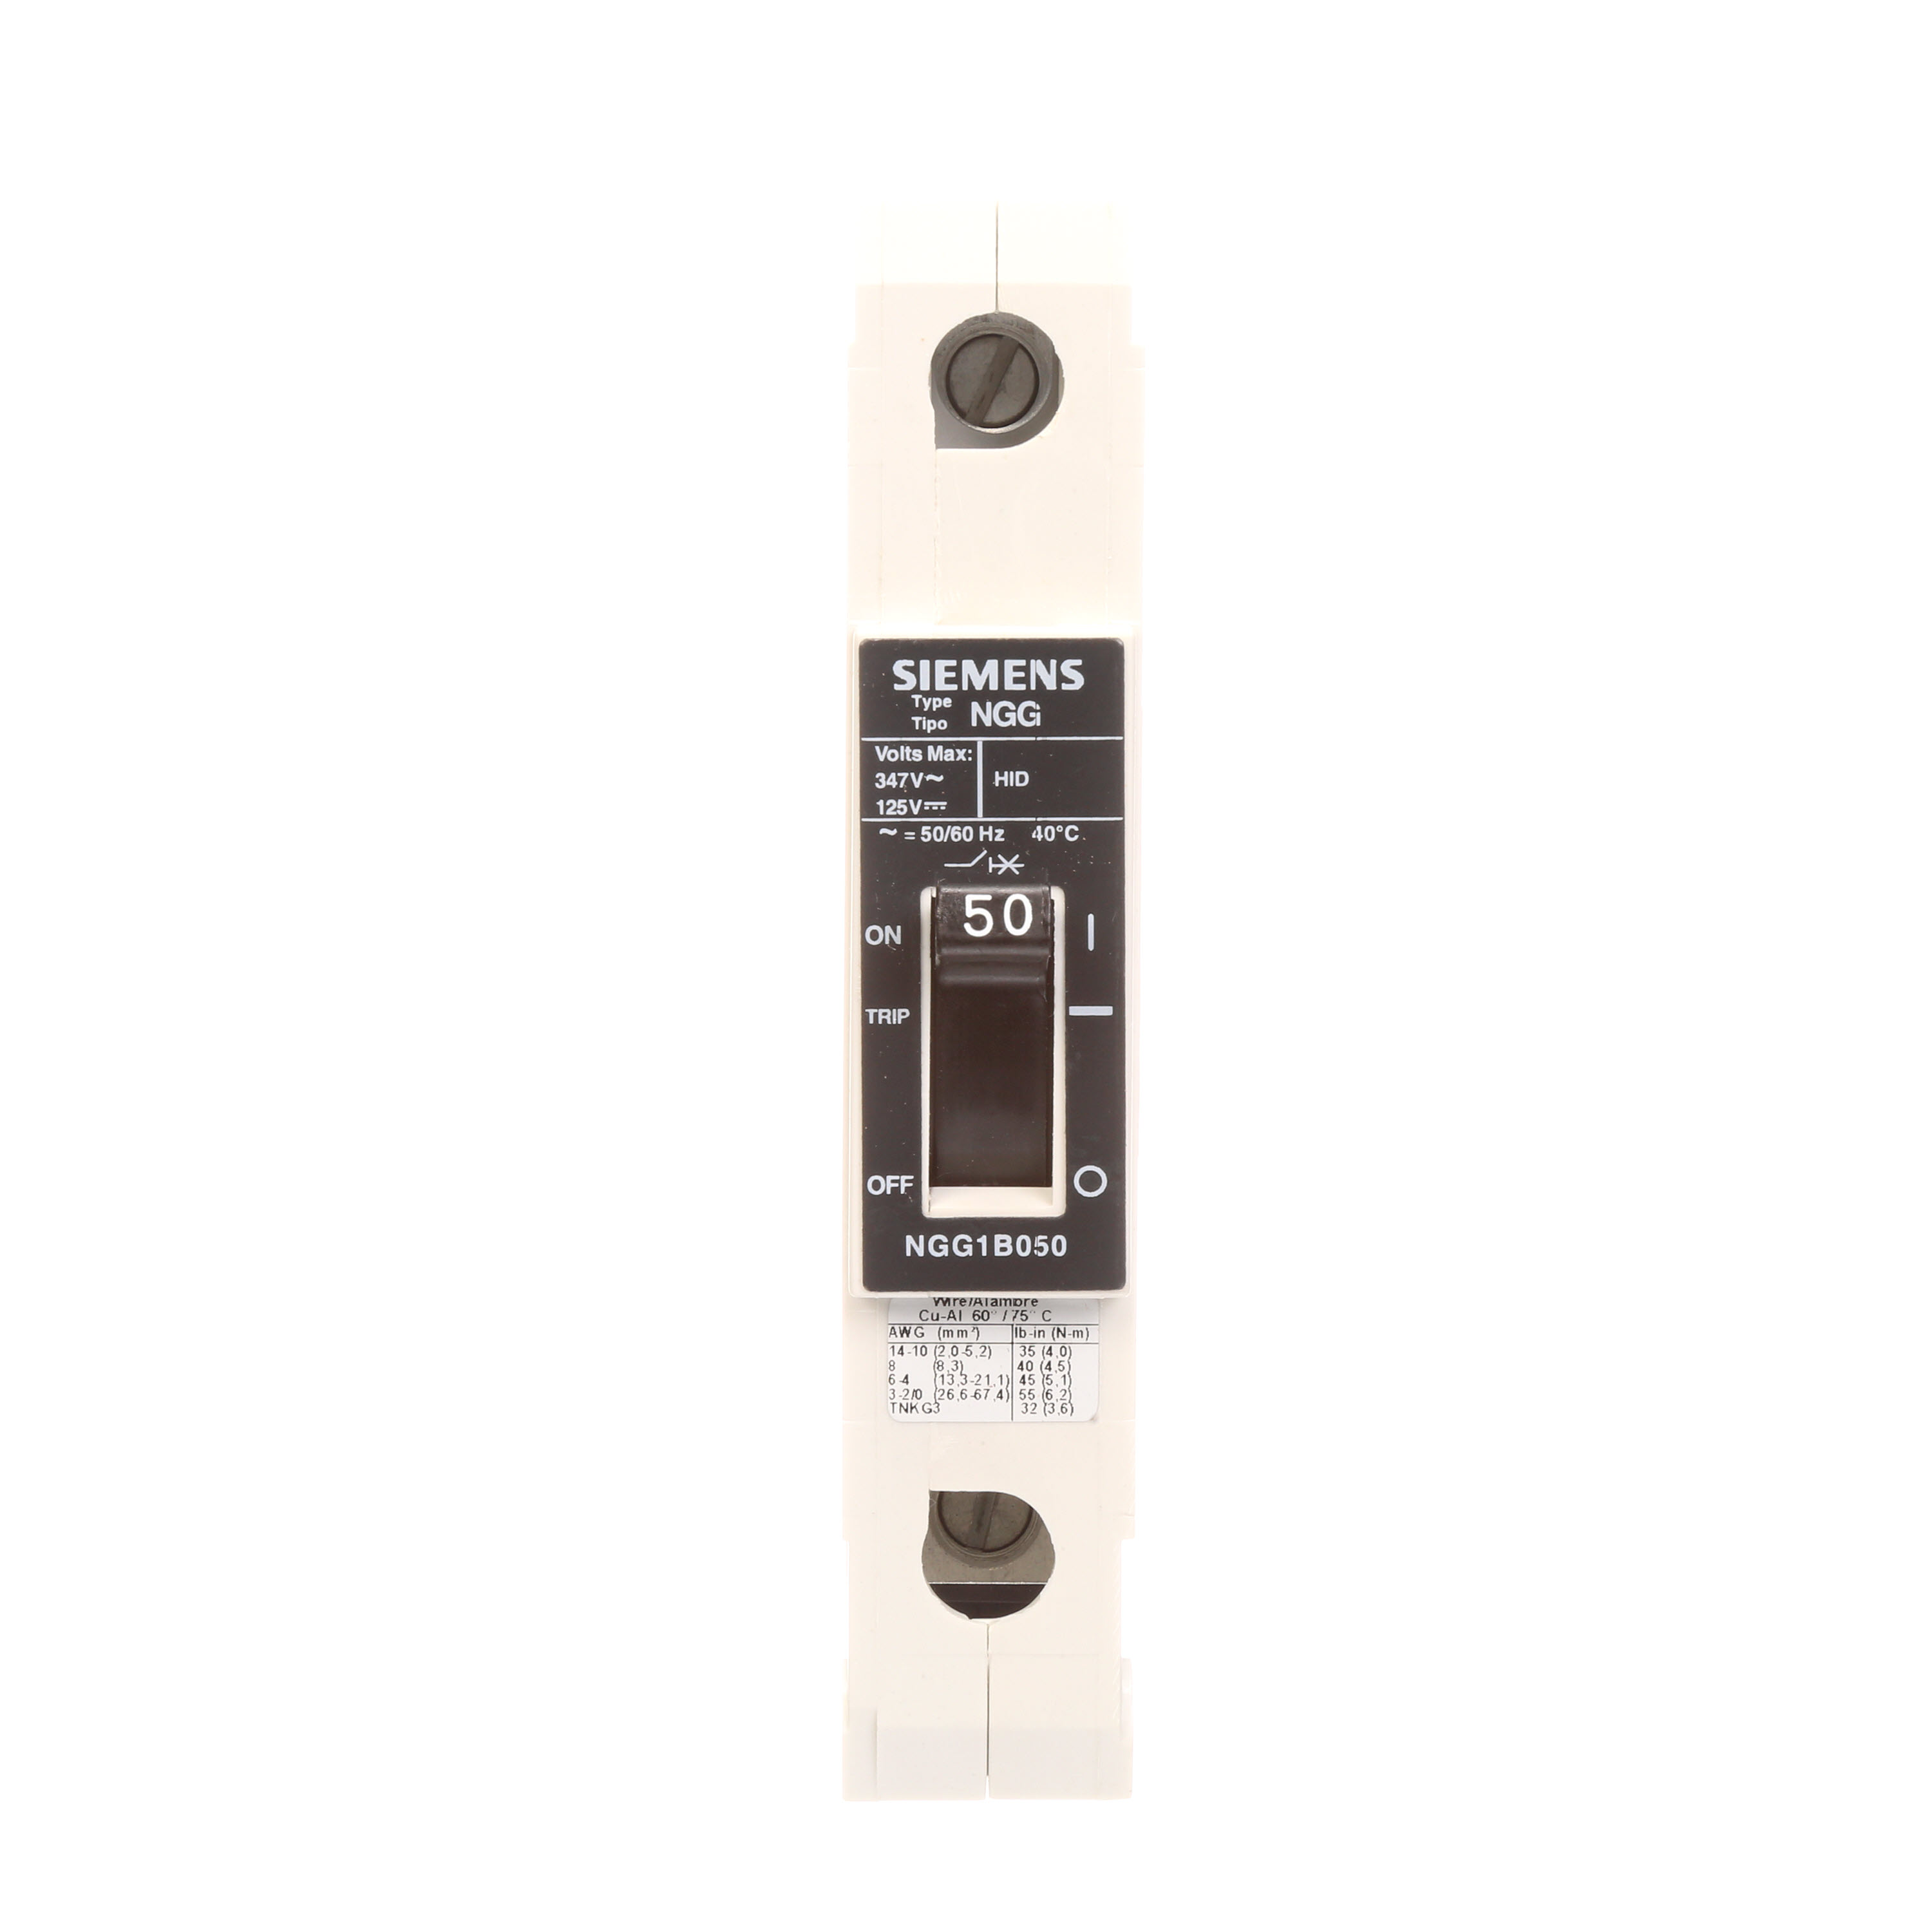 SIEMENS LOW VOLTAGE G FRAME CIRCUIT BREAKER WITH THERMAL - MAGNETIC TRIP. UL LISTED NGG FRAME WITH STANDARD BREAKING CAPACITY. 50A 1-POLE (14KAIC AT 347V) (25KAIC AT 277V). SPECIAL FEATURES MOUNTS ON DIN RAIL / SCREW, LINE AND LOAD SIDE LUGS (TC1GG20) WIRE RANGE 8 - 1/0 AWS (CU/AL). DIMENSIONS (W x H x D) IN 1 x 5.4 x2.8.